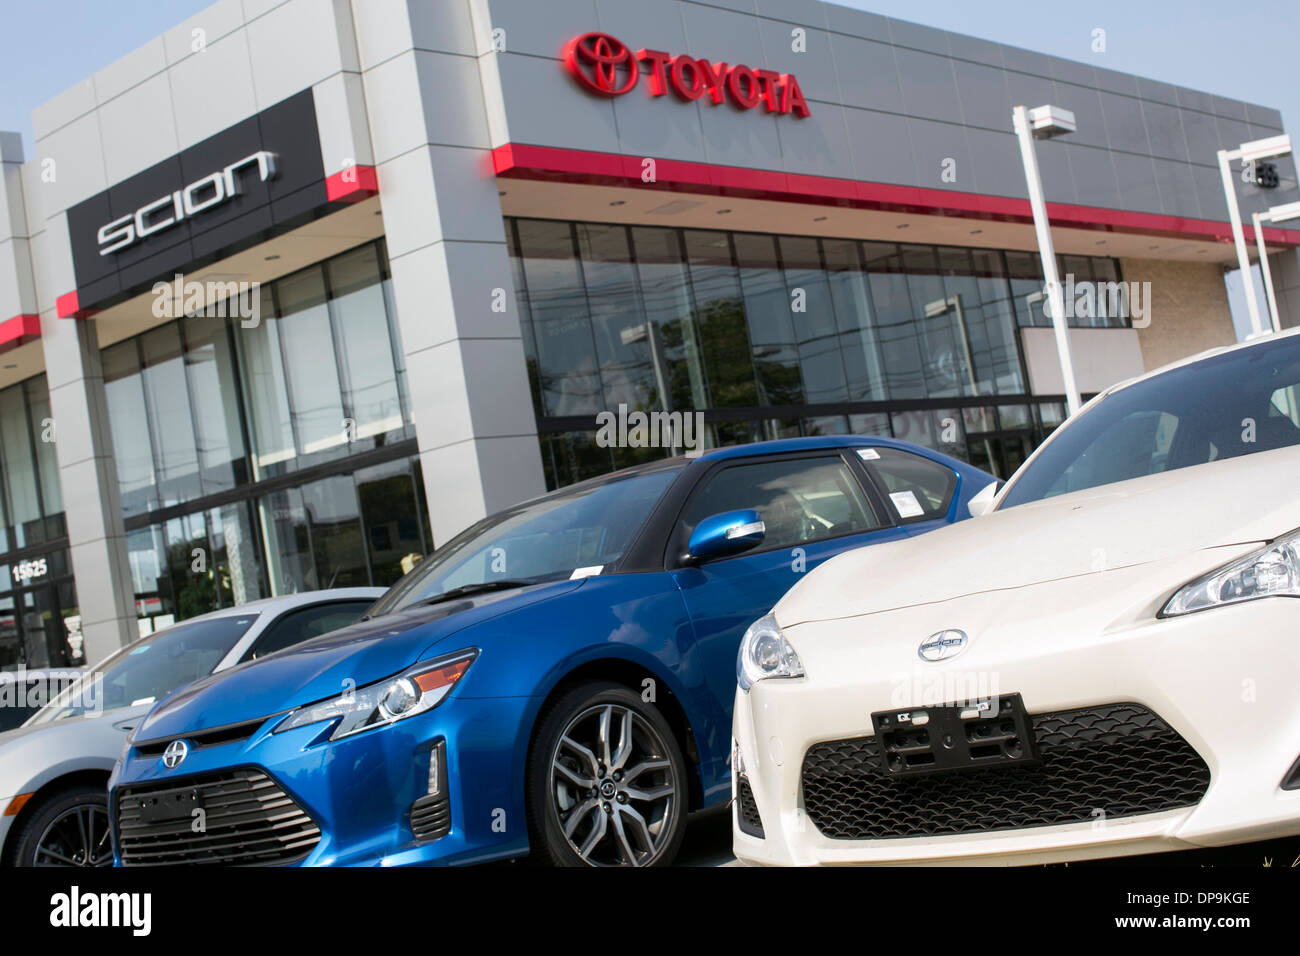 A Toyota and Scion dealer lot in suburban Maryland.  Stock Photo